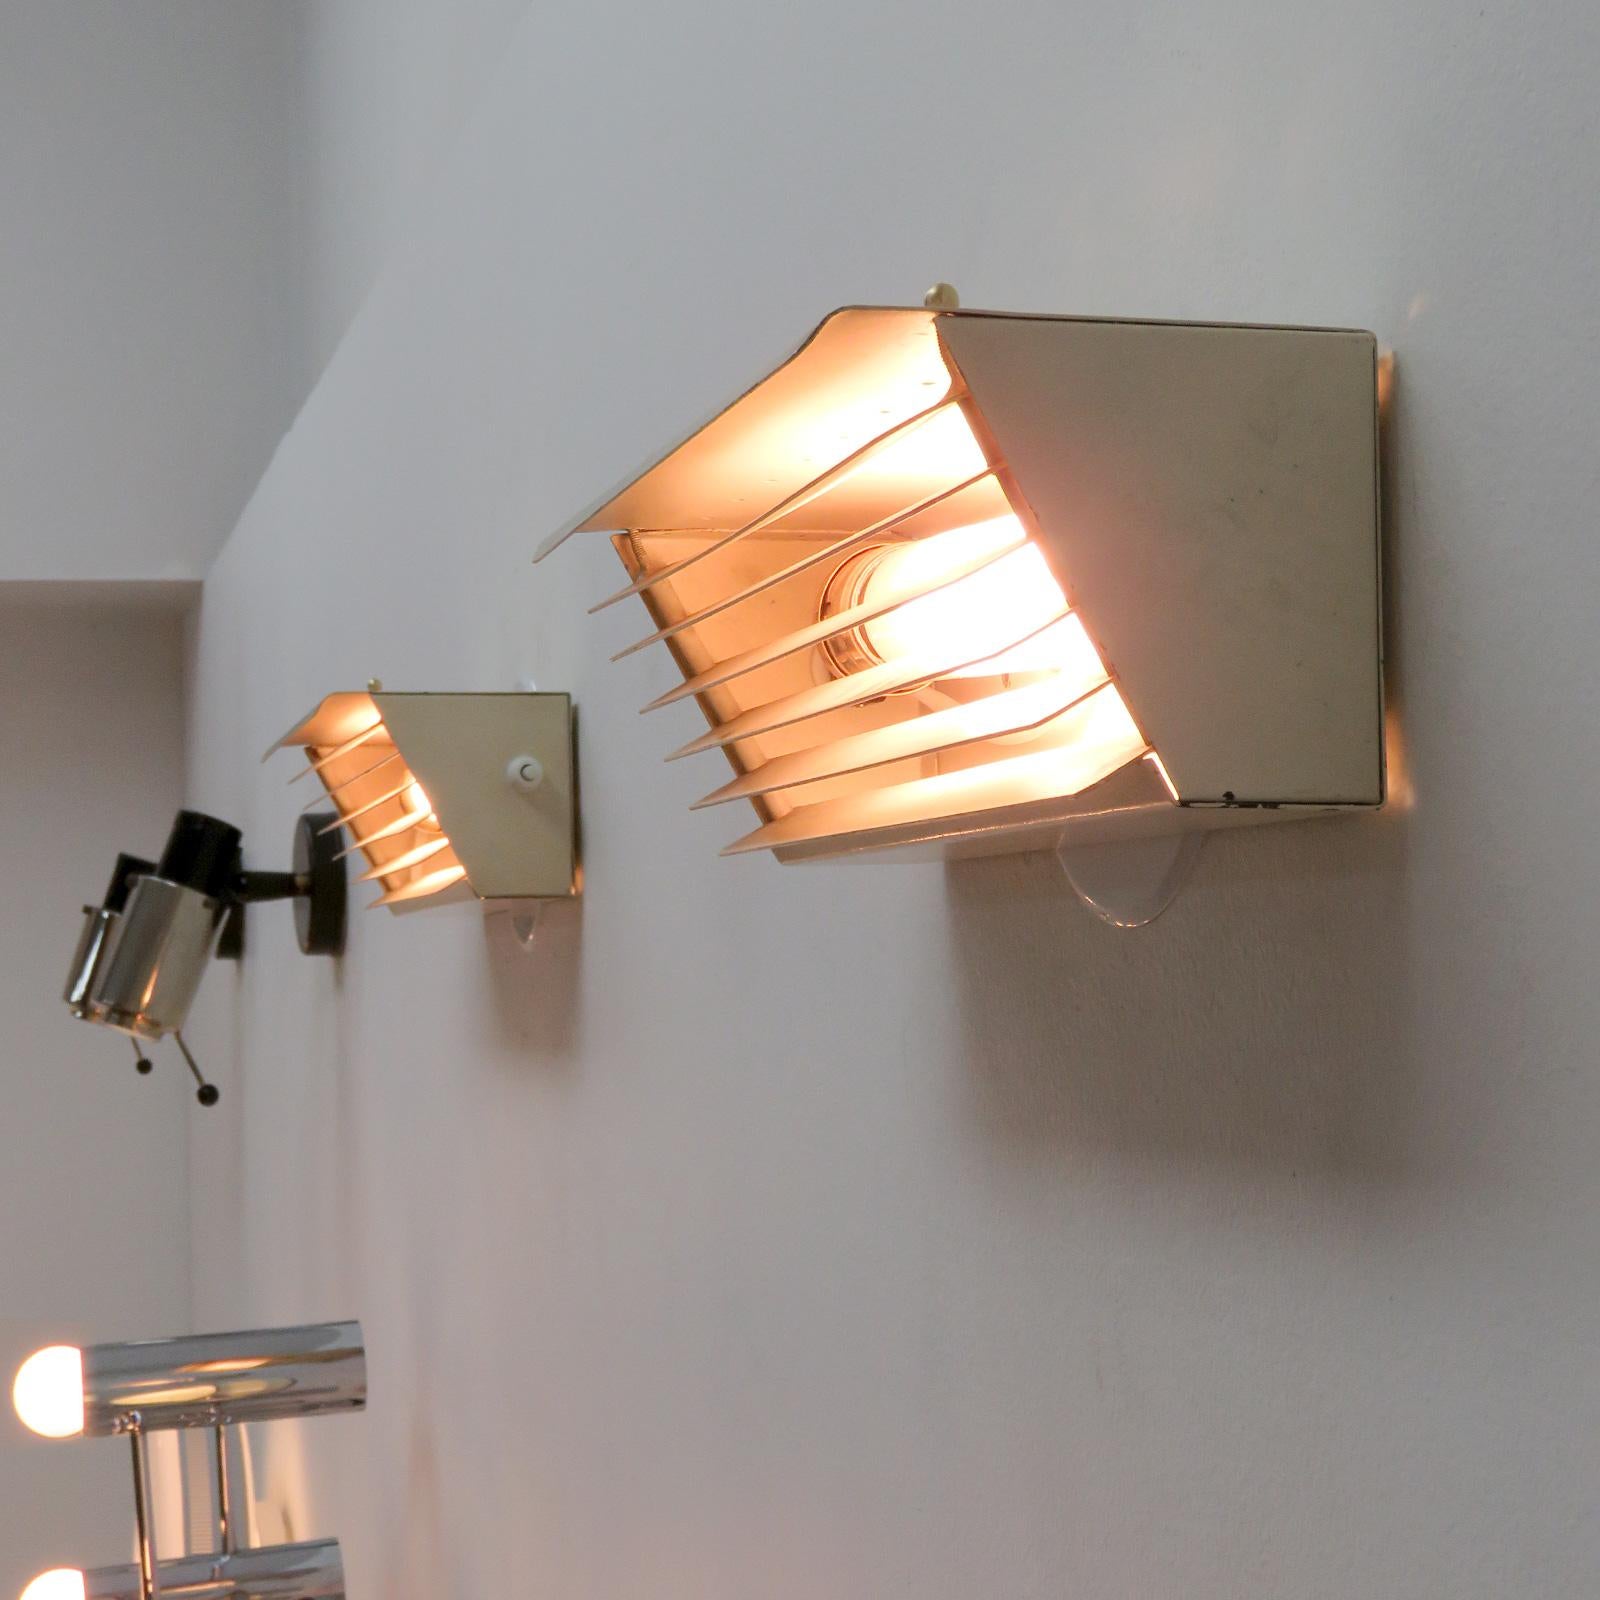 Metal Jacques Biny for Luminalite Edition Model '212' Wall Lights